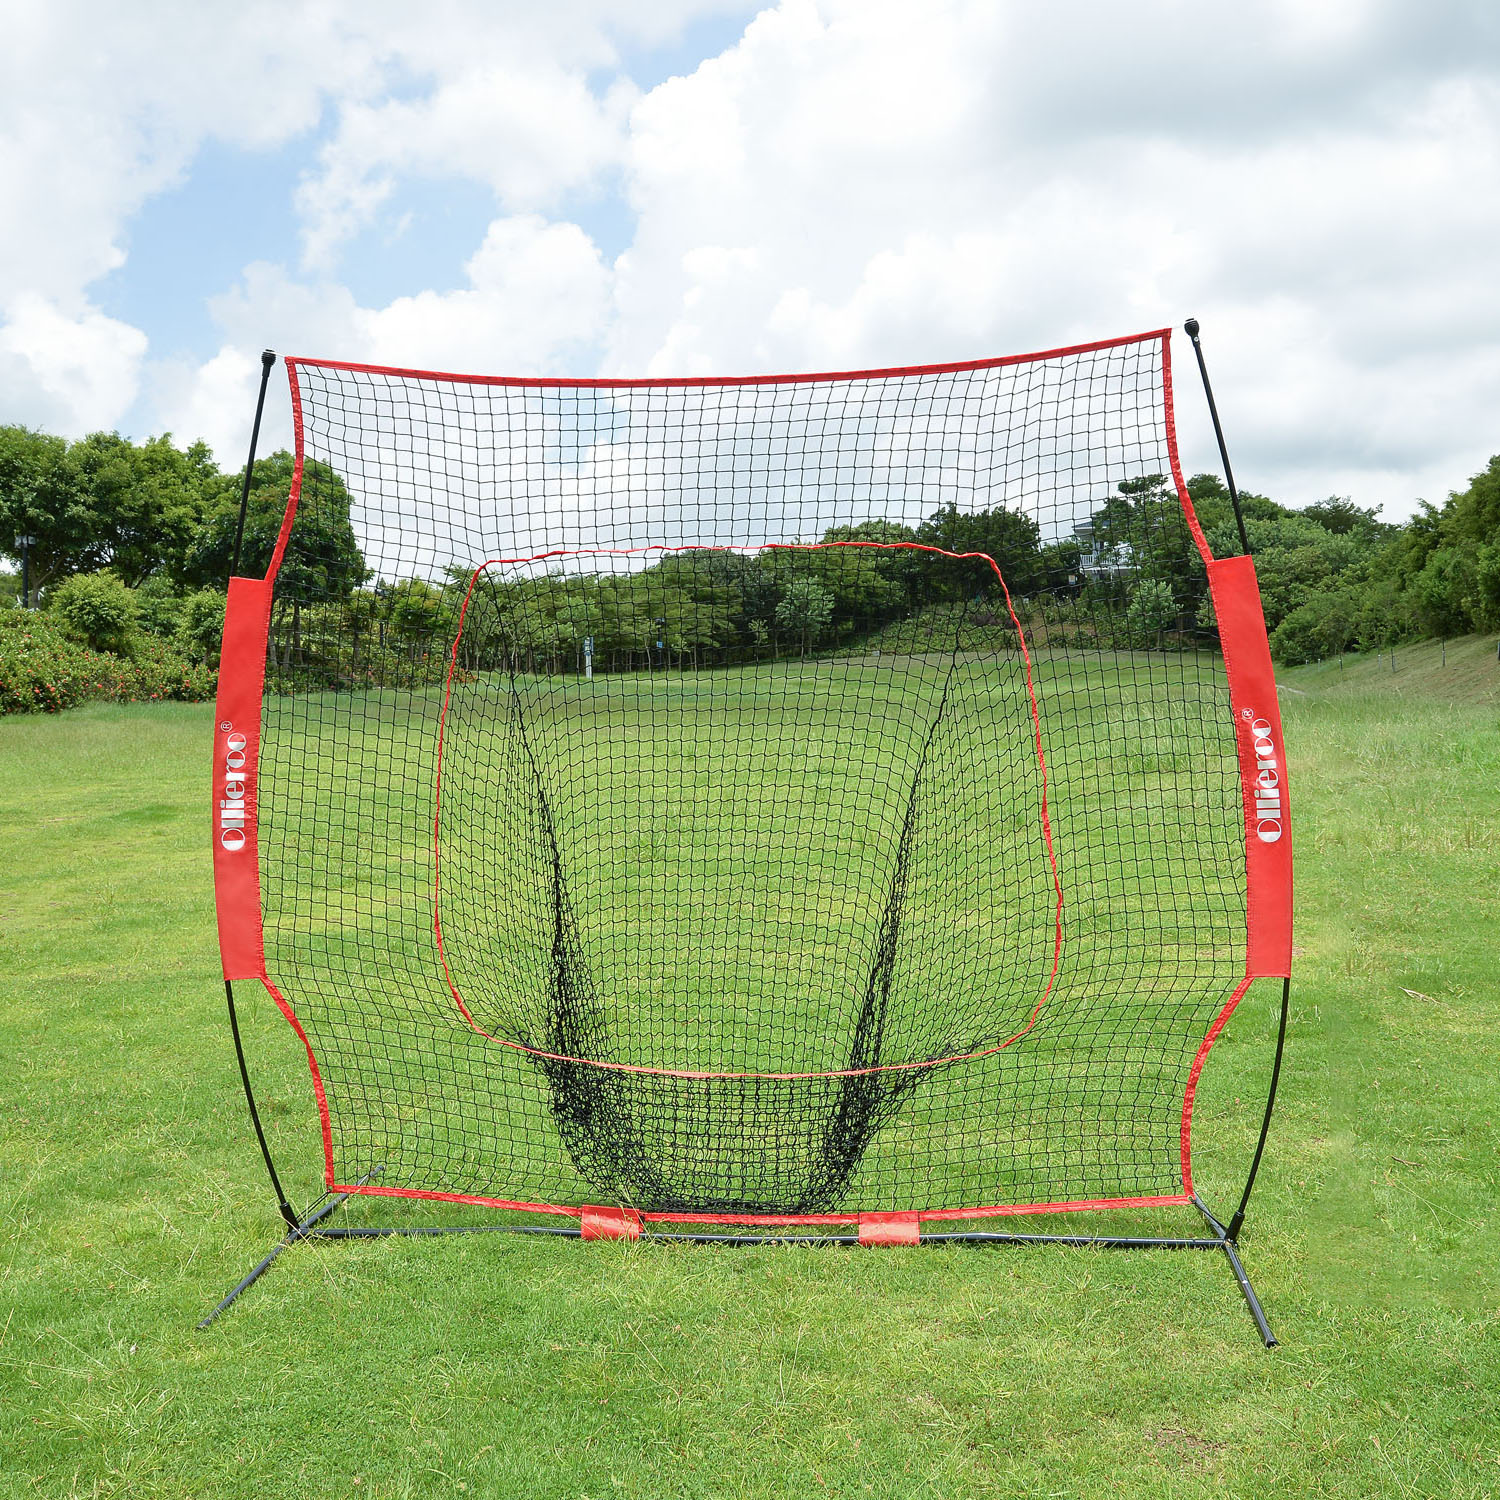 Ollieroo 7'x7' Baseball & Softball Practice Net for Hitting, Pitching - Includes Carry Bag - image 4 of 11